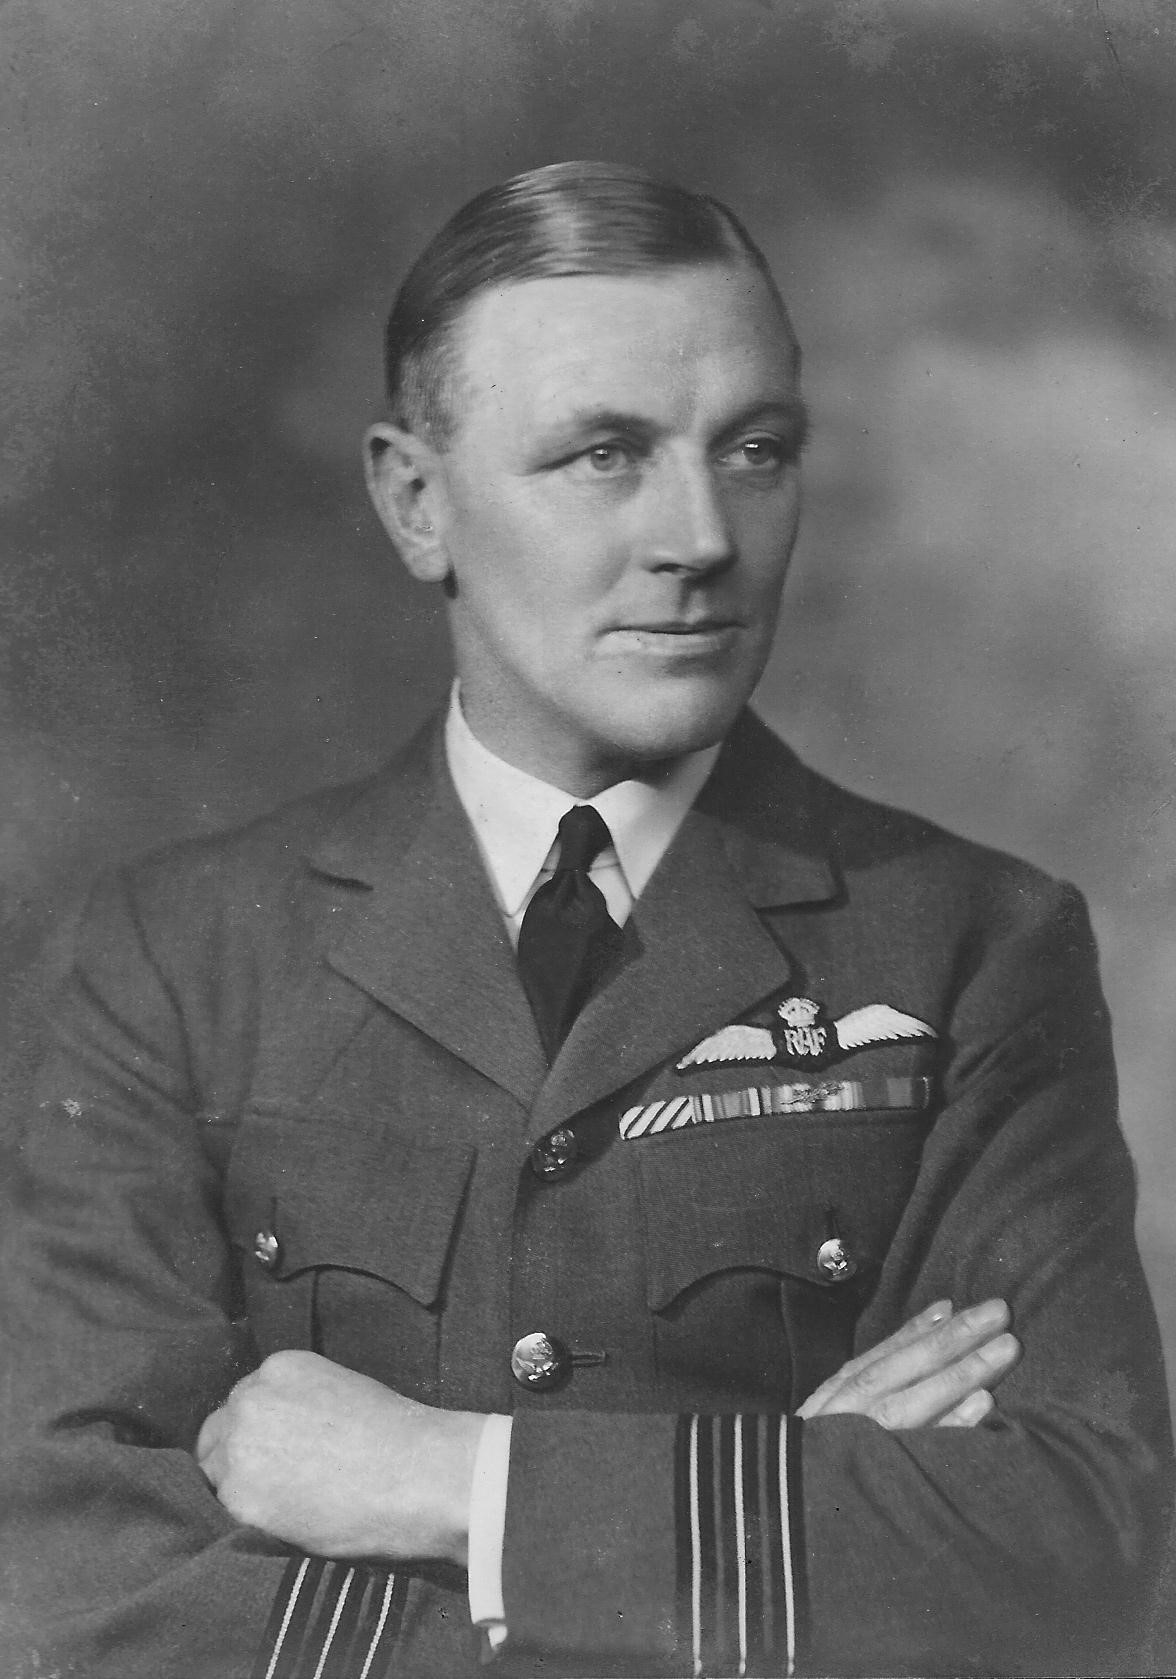 Air Commodore Guy Carter as a Wing Commander